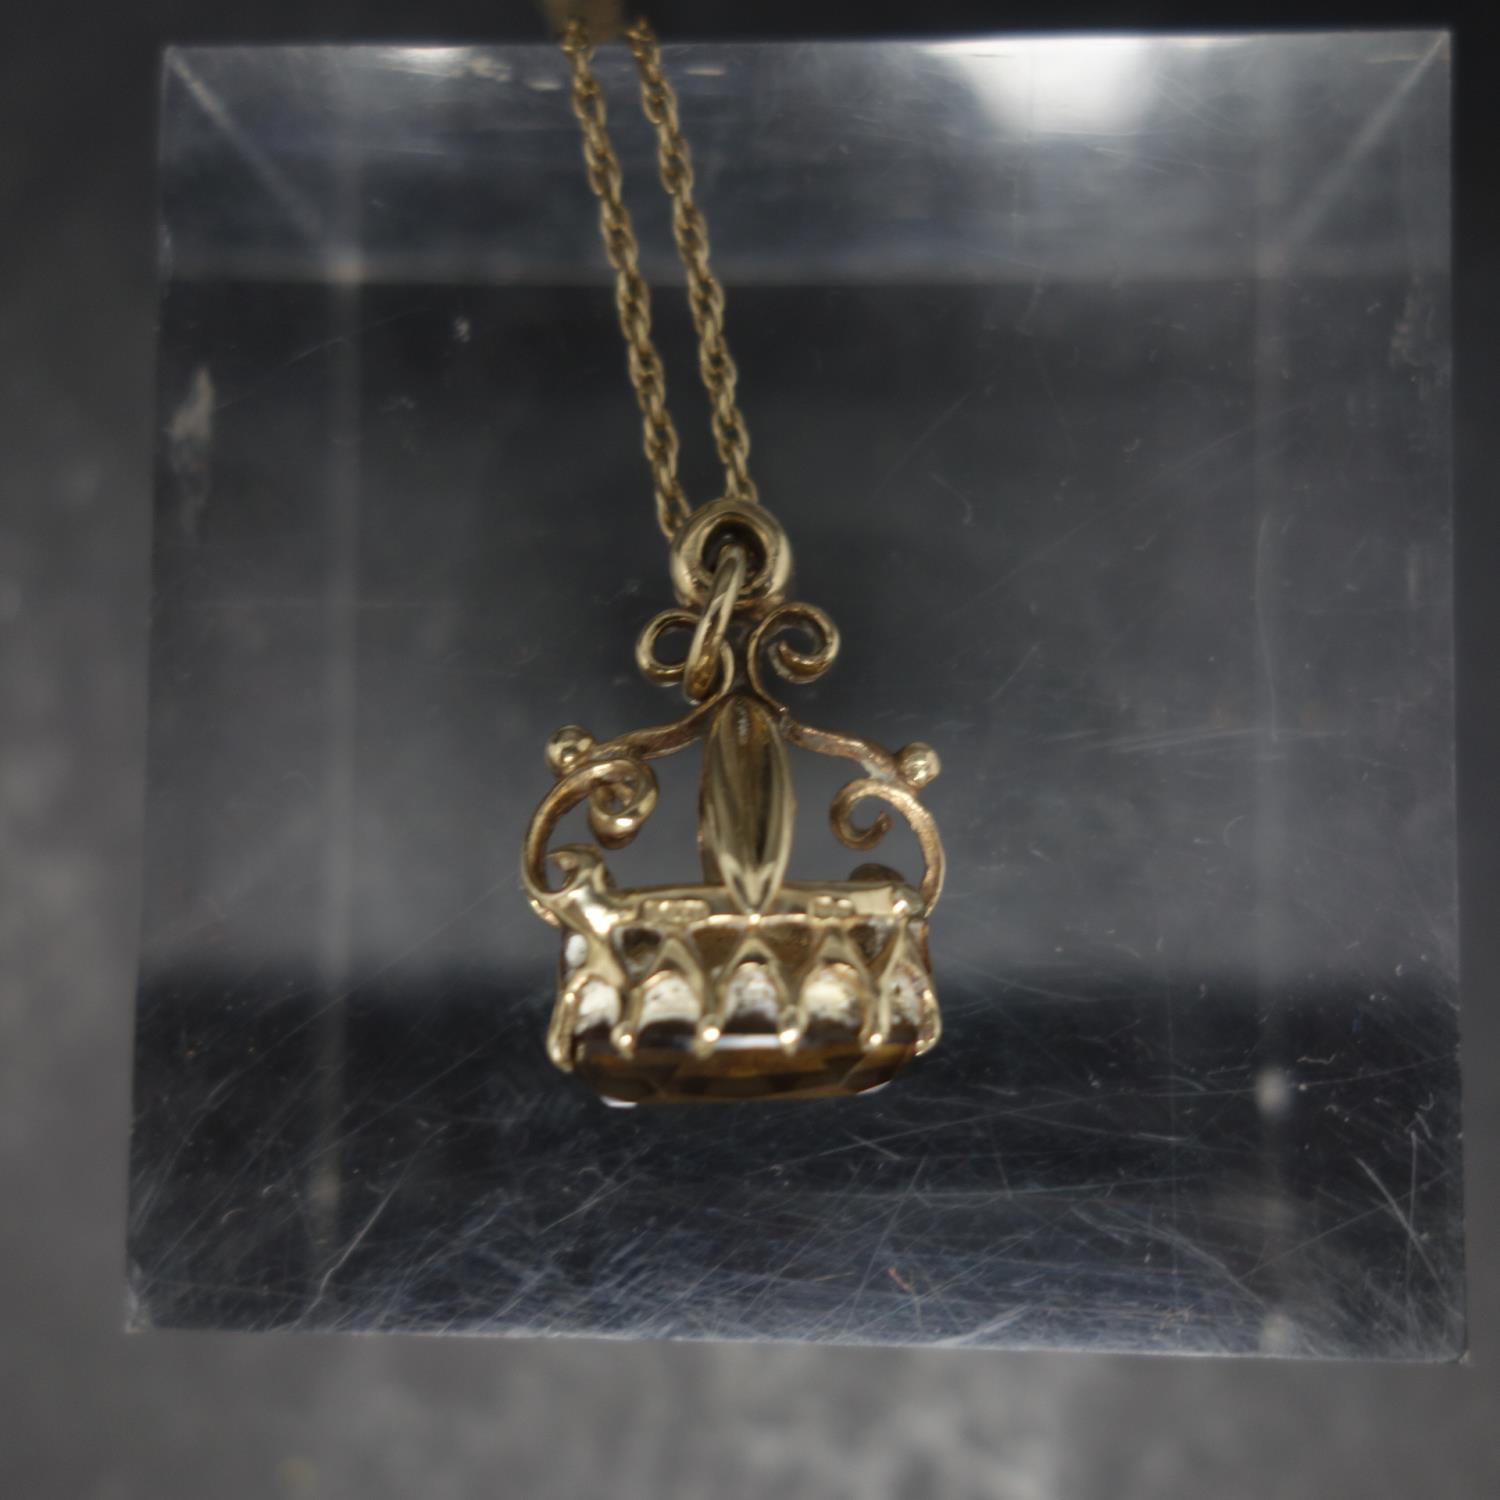 A 9ct yellow gold and natural stone set pendant on a 9ct yellow gold chain, gross weight 4.9g - Image 5 of 5